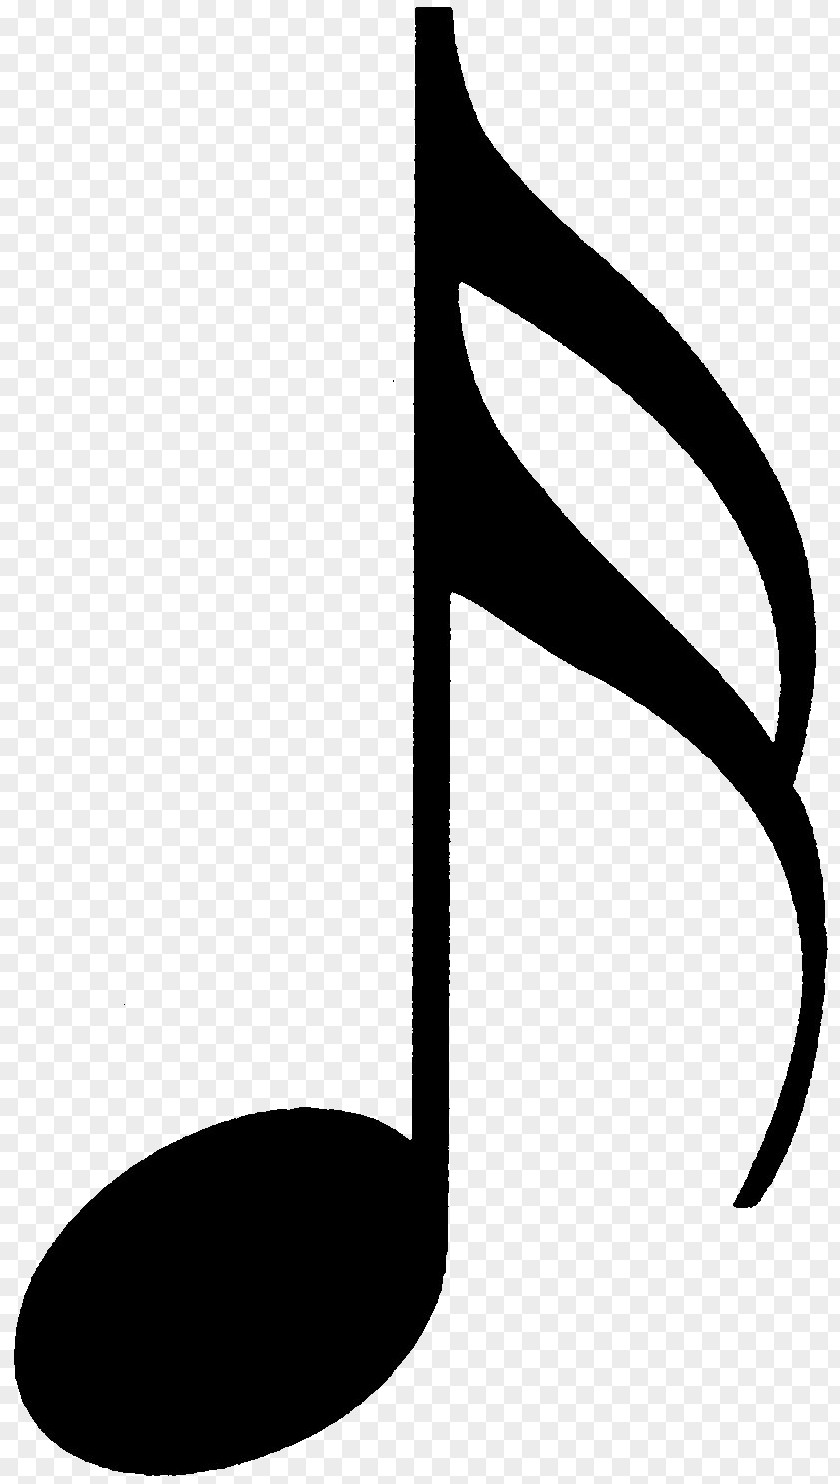 Musical Note Sixteenth Dotted Eighth Quarter PNG